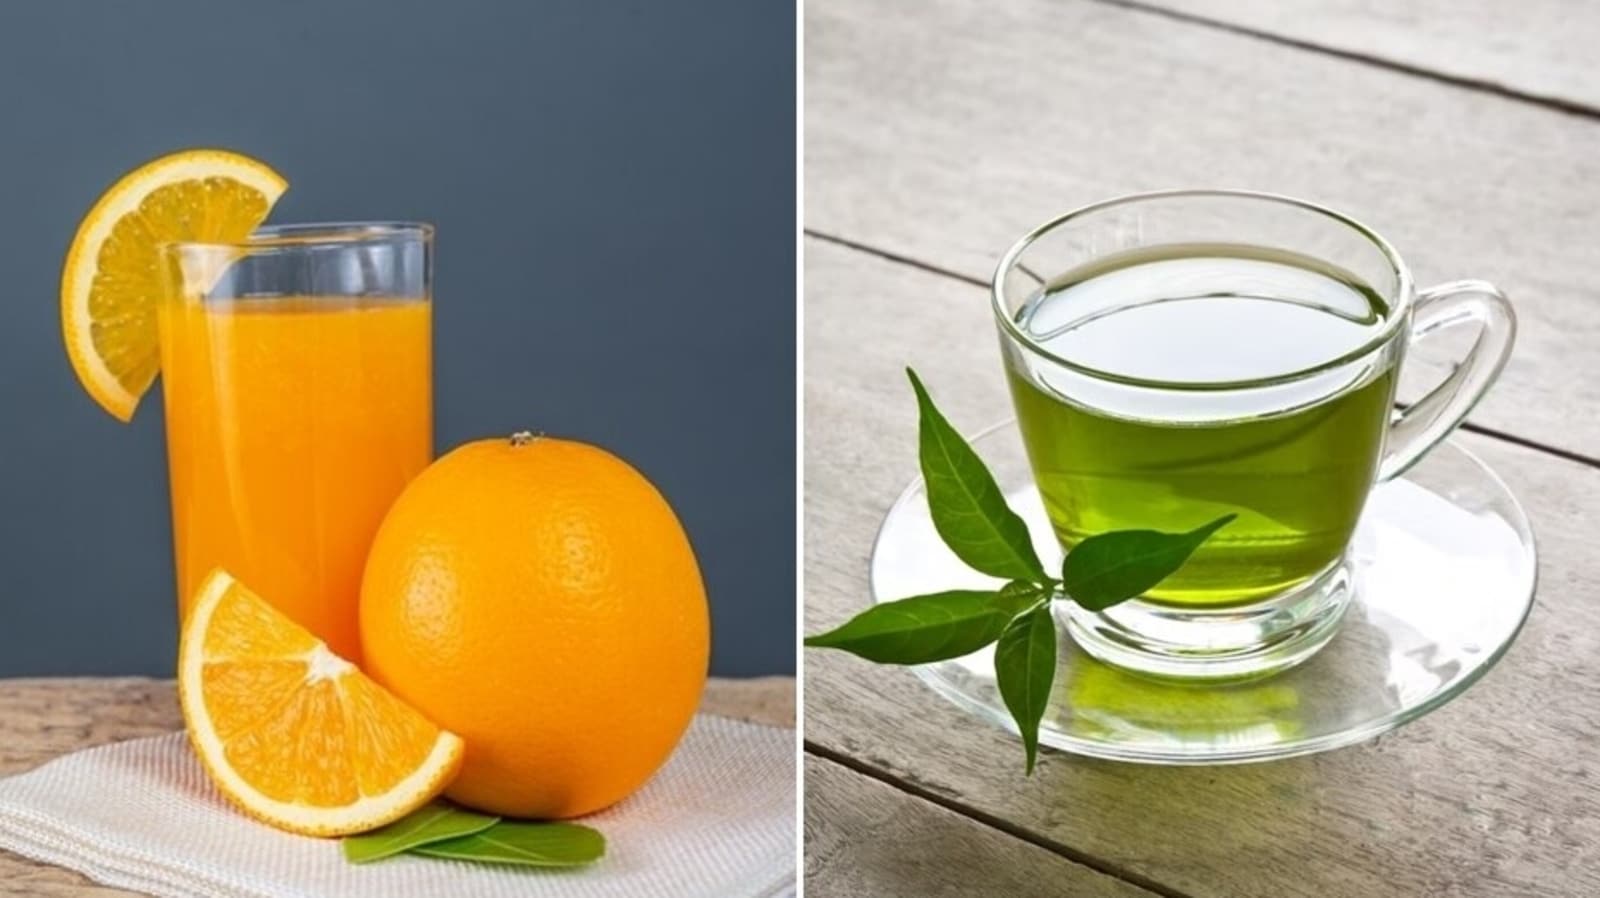 Orange juice vs green tea: Which is healthier for you? Ayurveda expert shares